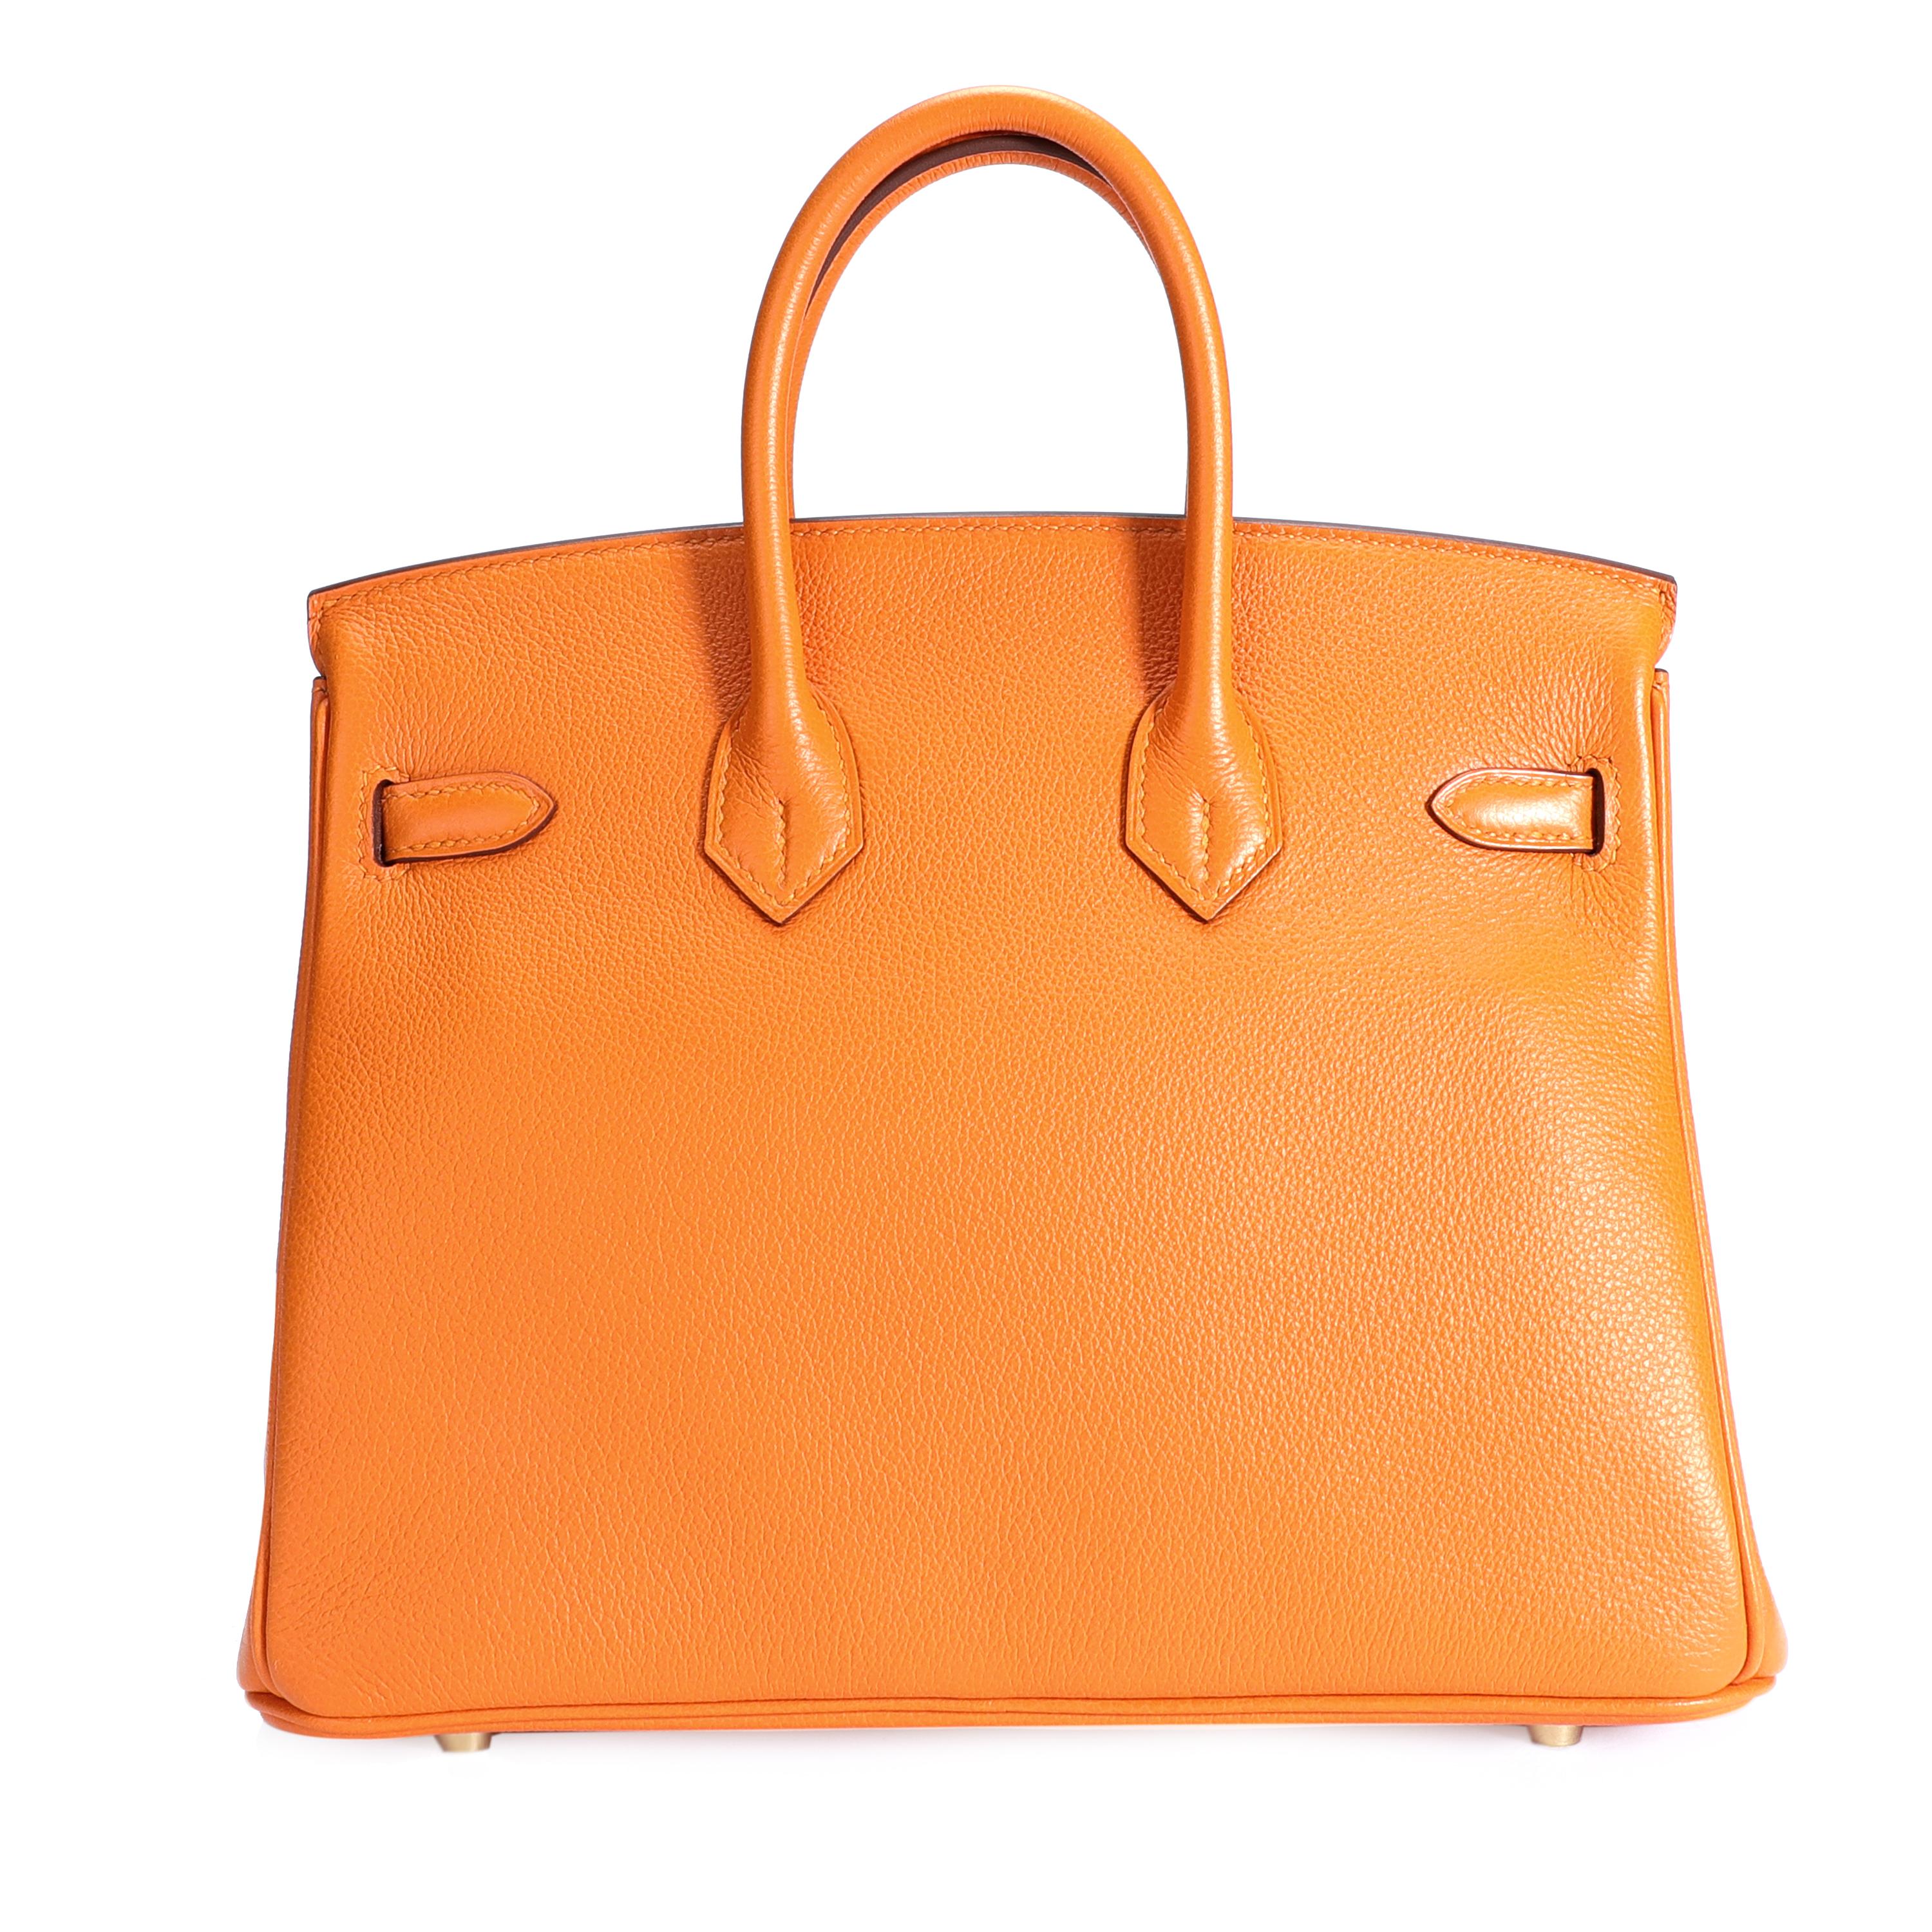 Hermès Abricot Novillo Leather Birkin 25 with Gold Hardware
SKU: 106798

From the 2020 Collection, the smallest member of the Birkin family is crafted in Novillo Leather in a dreamy Abricot hue.

Handbag Condition: Excellent
Condition Comments: